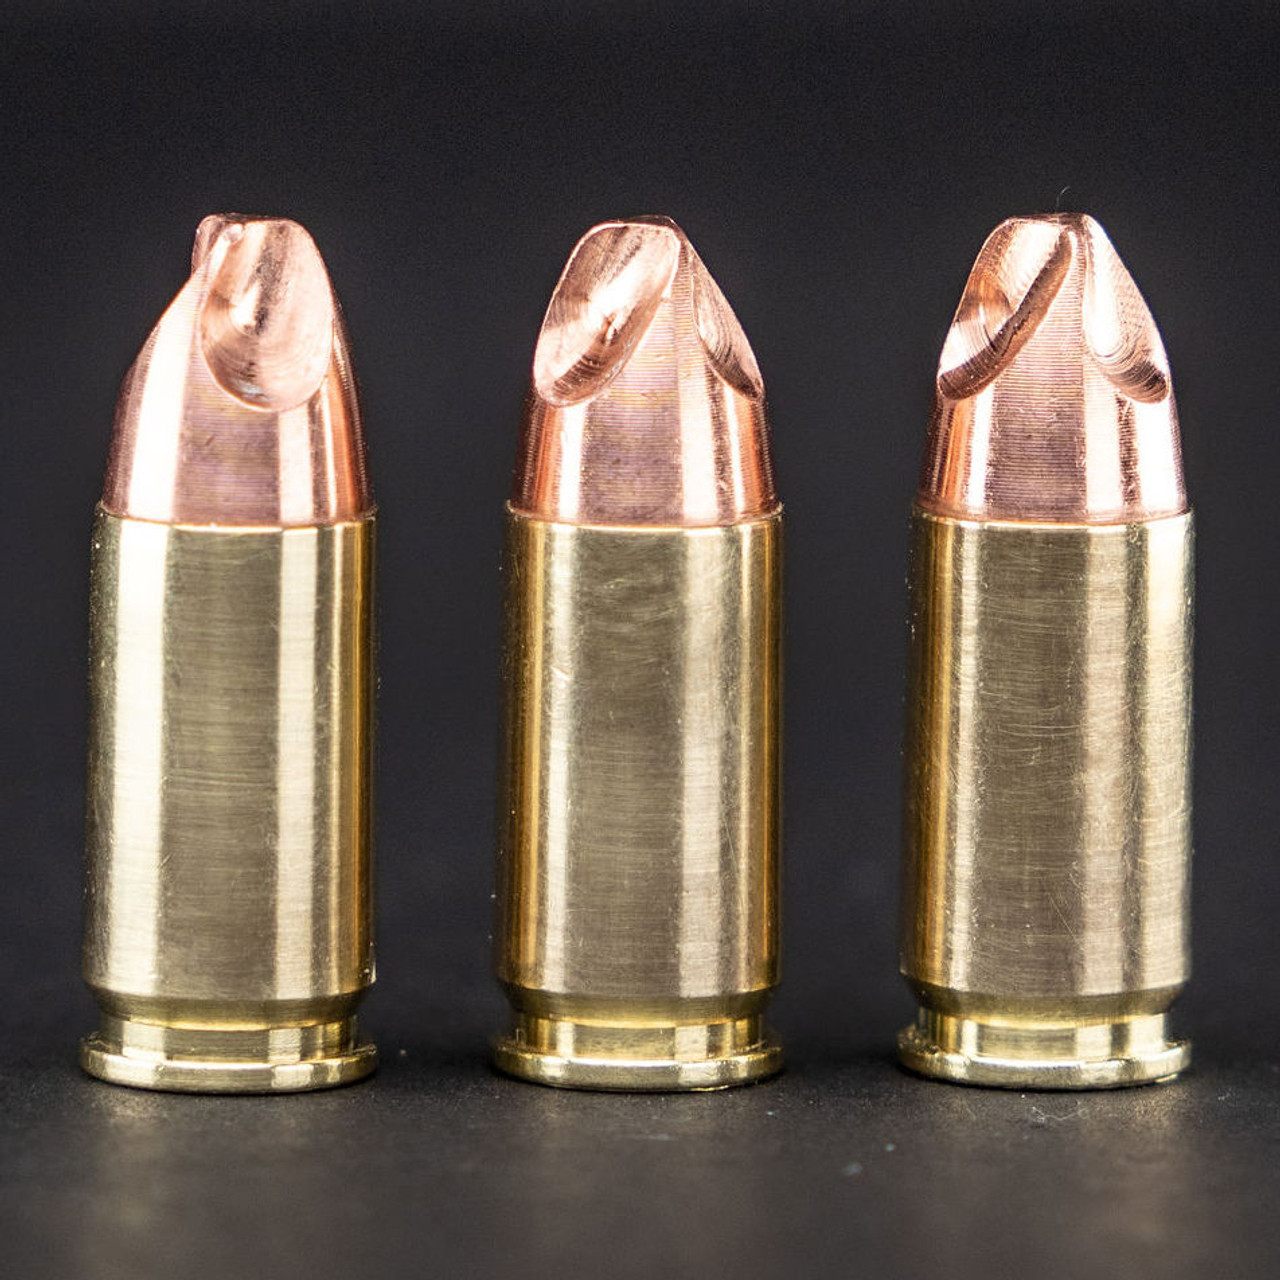 Hollow Point Bullets 9Mm